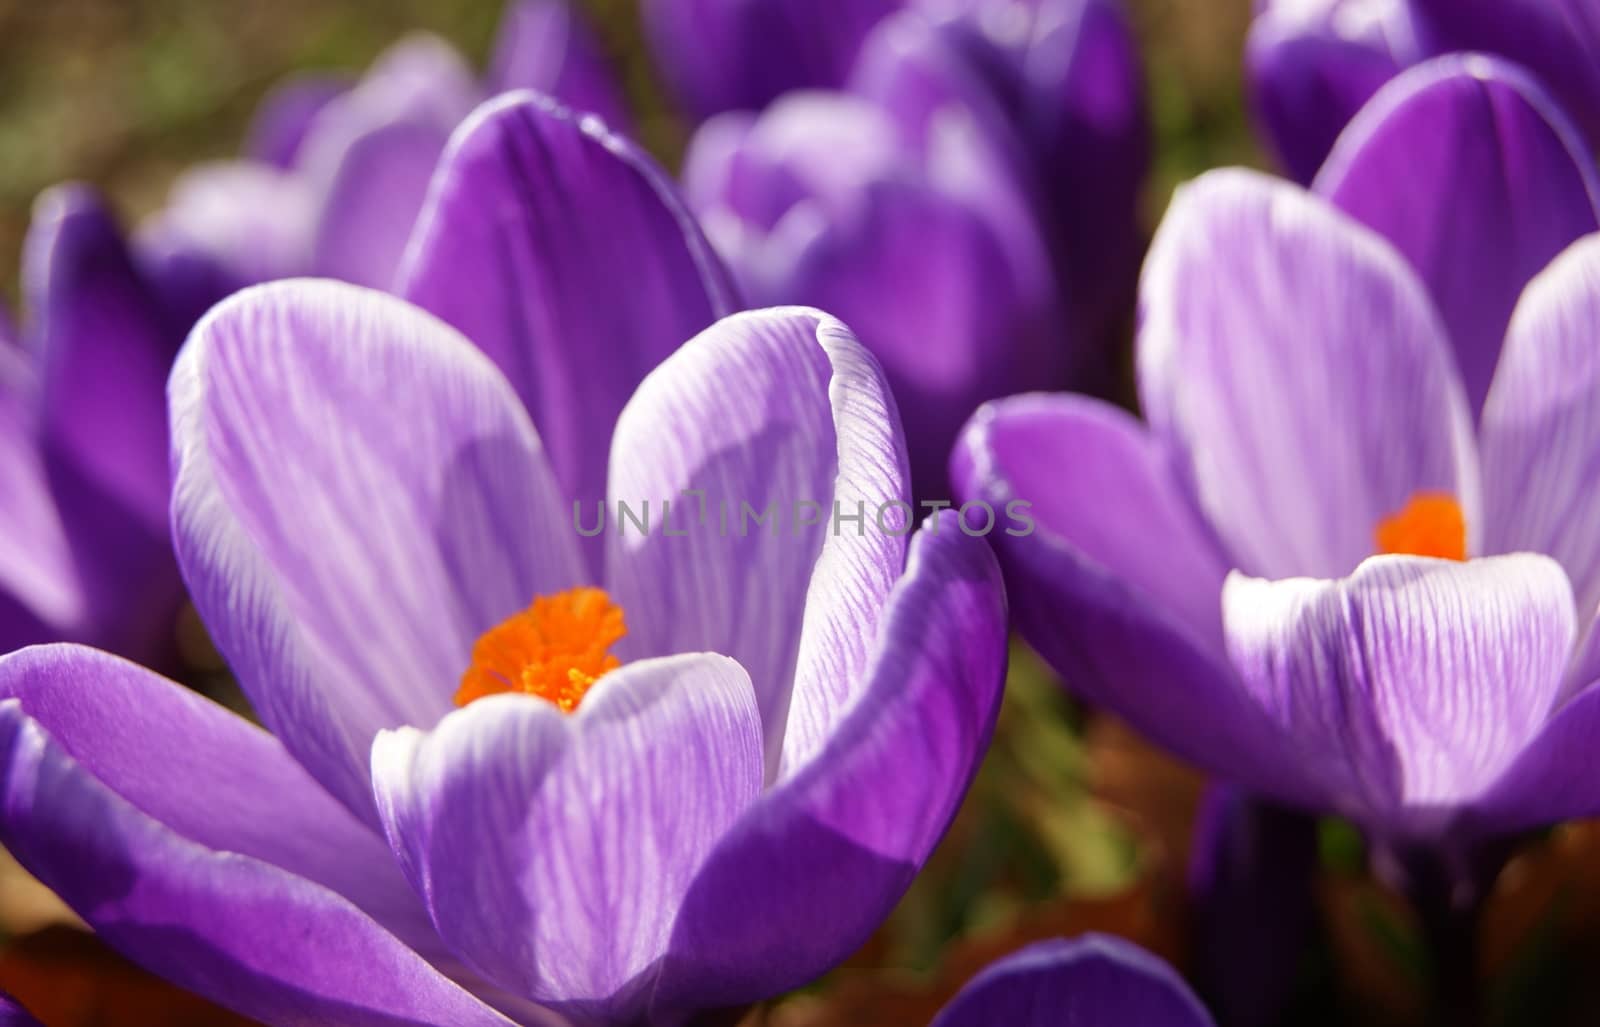 A close-up image of colourful Spring Crocus flowers.